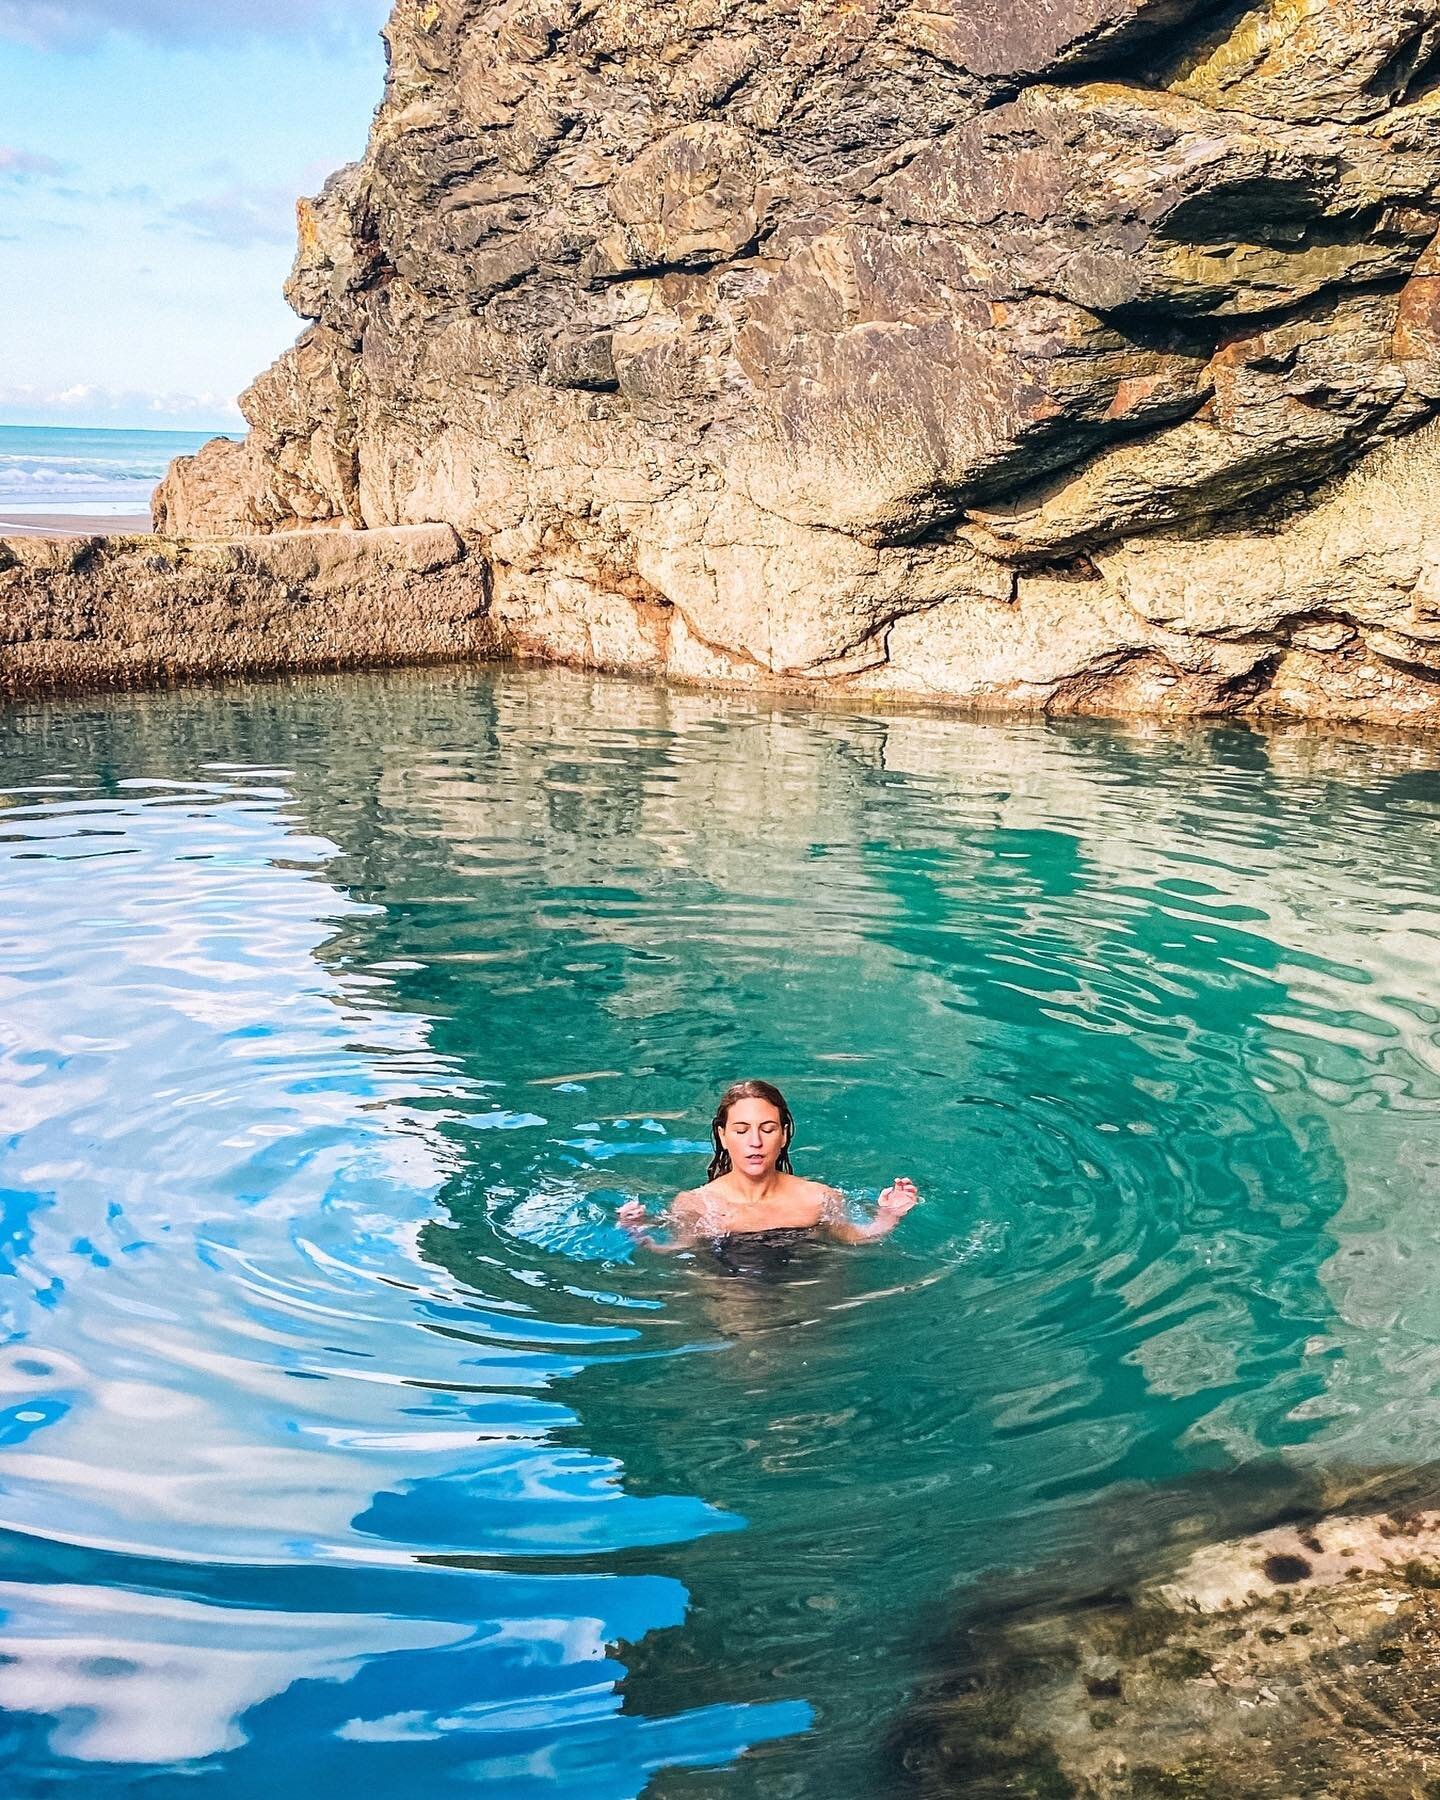 I wanted to clear my mind, so I allowed the water to wash my thoughts away. ⁠
⁠
The theme for #mentalhealthawarenessweek is nature, and if you've followed me for even a moment you may know that my favourite pastime is an icy dip in our majestic seas 